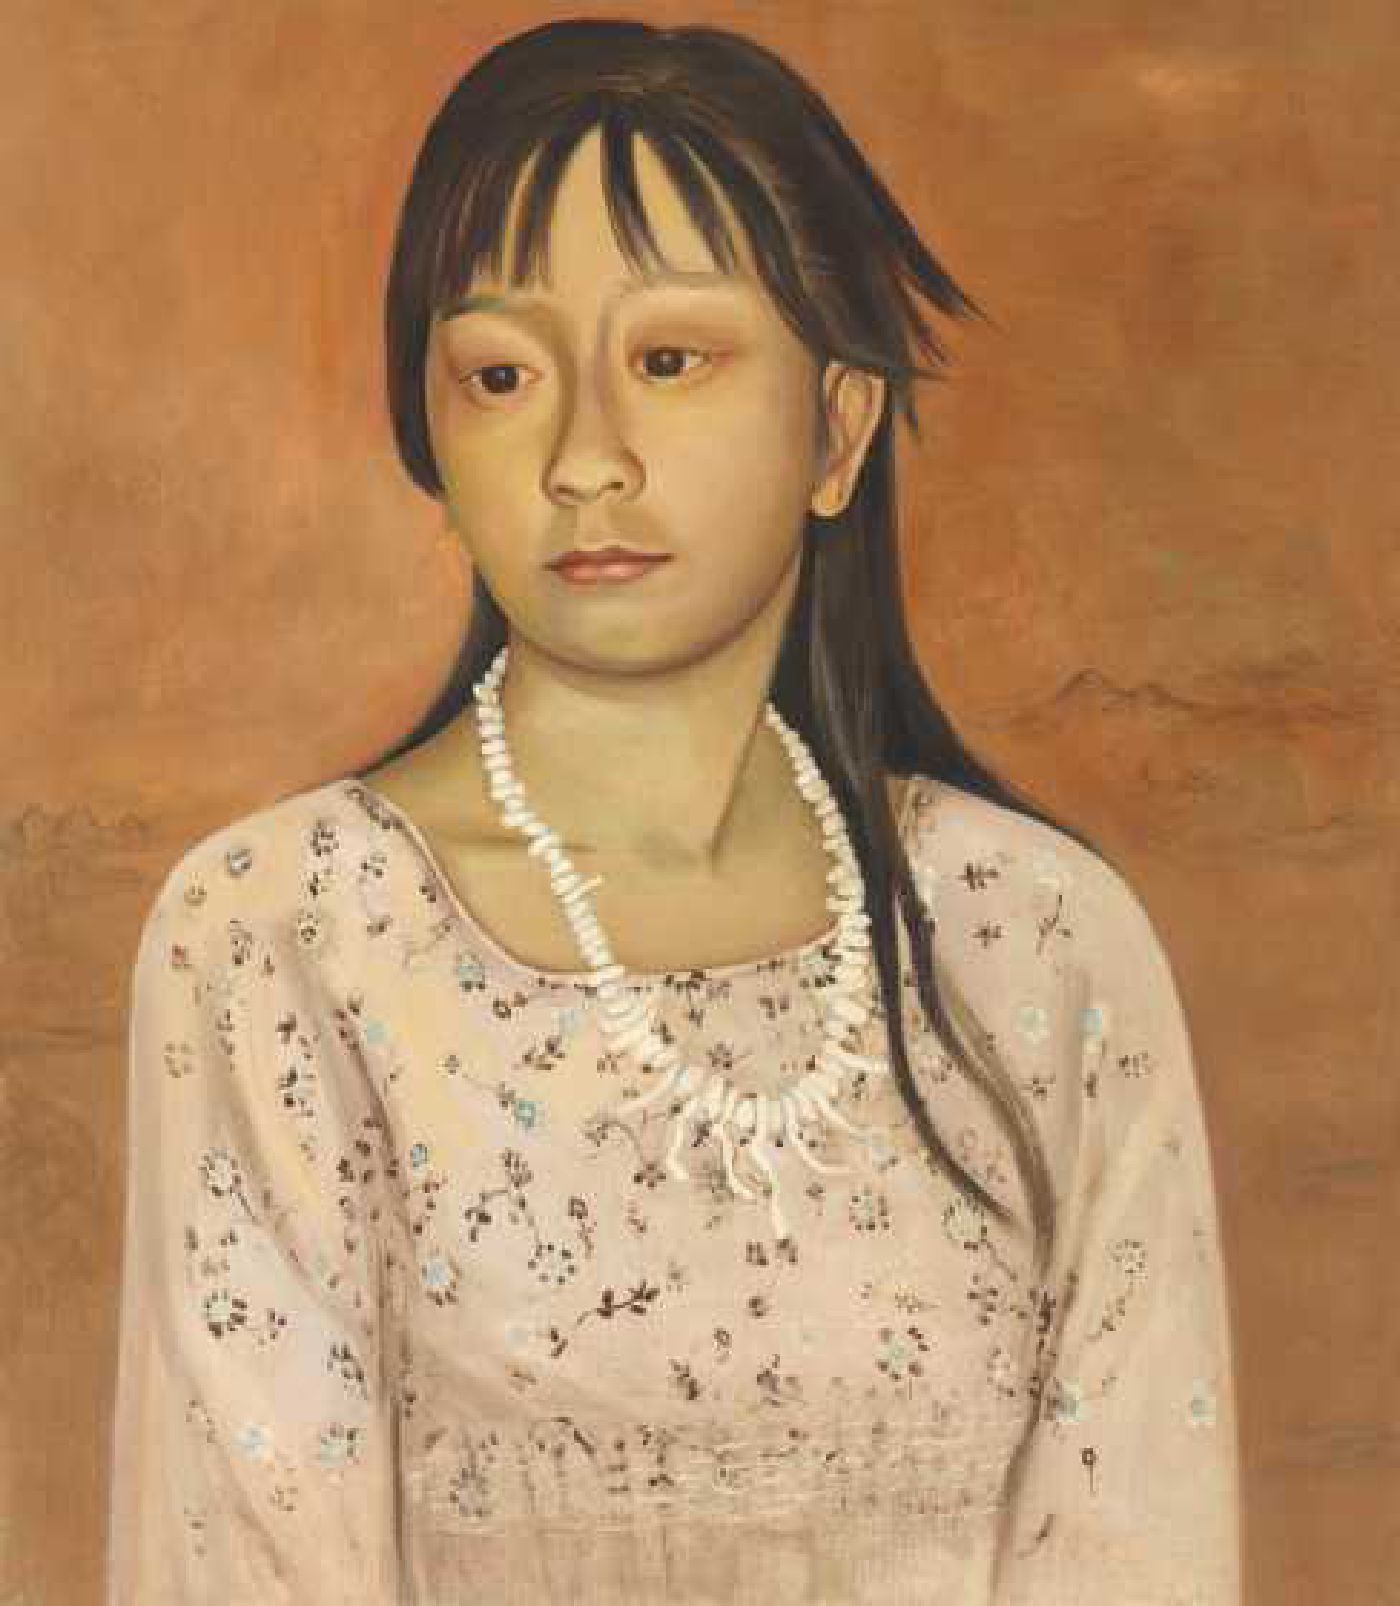 Young Girl with Shell Necklace - oil on linen,  23 x 20 inches, 2009-2010